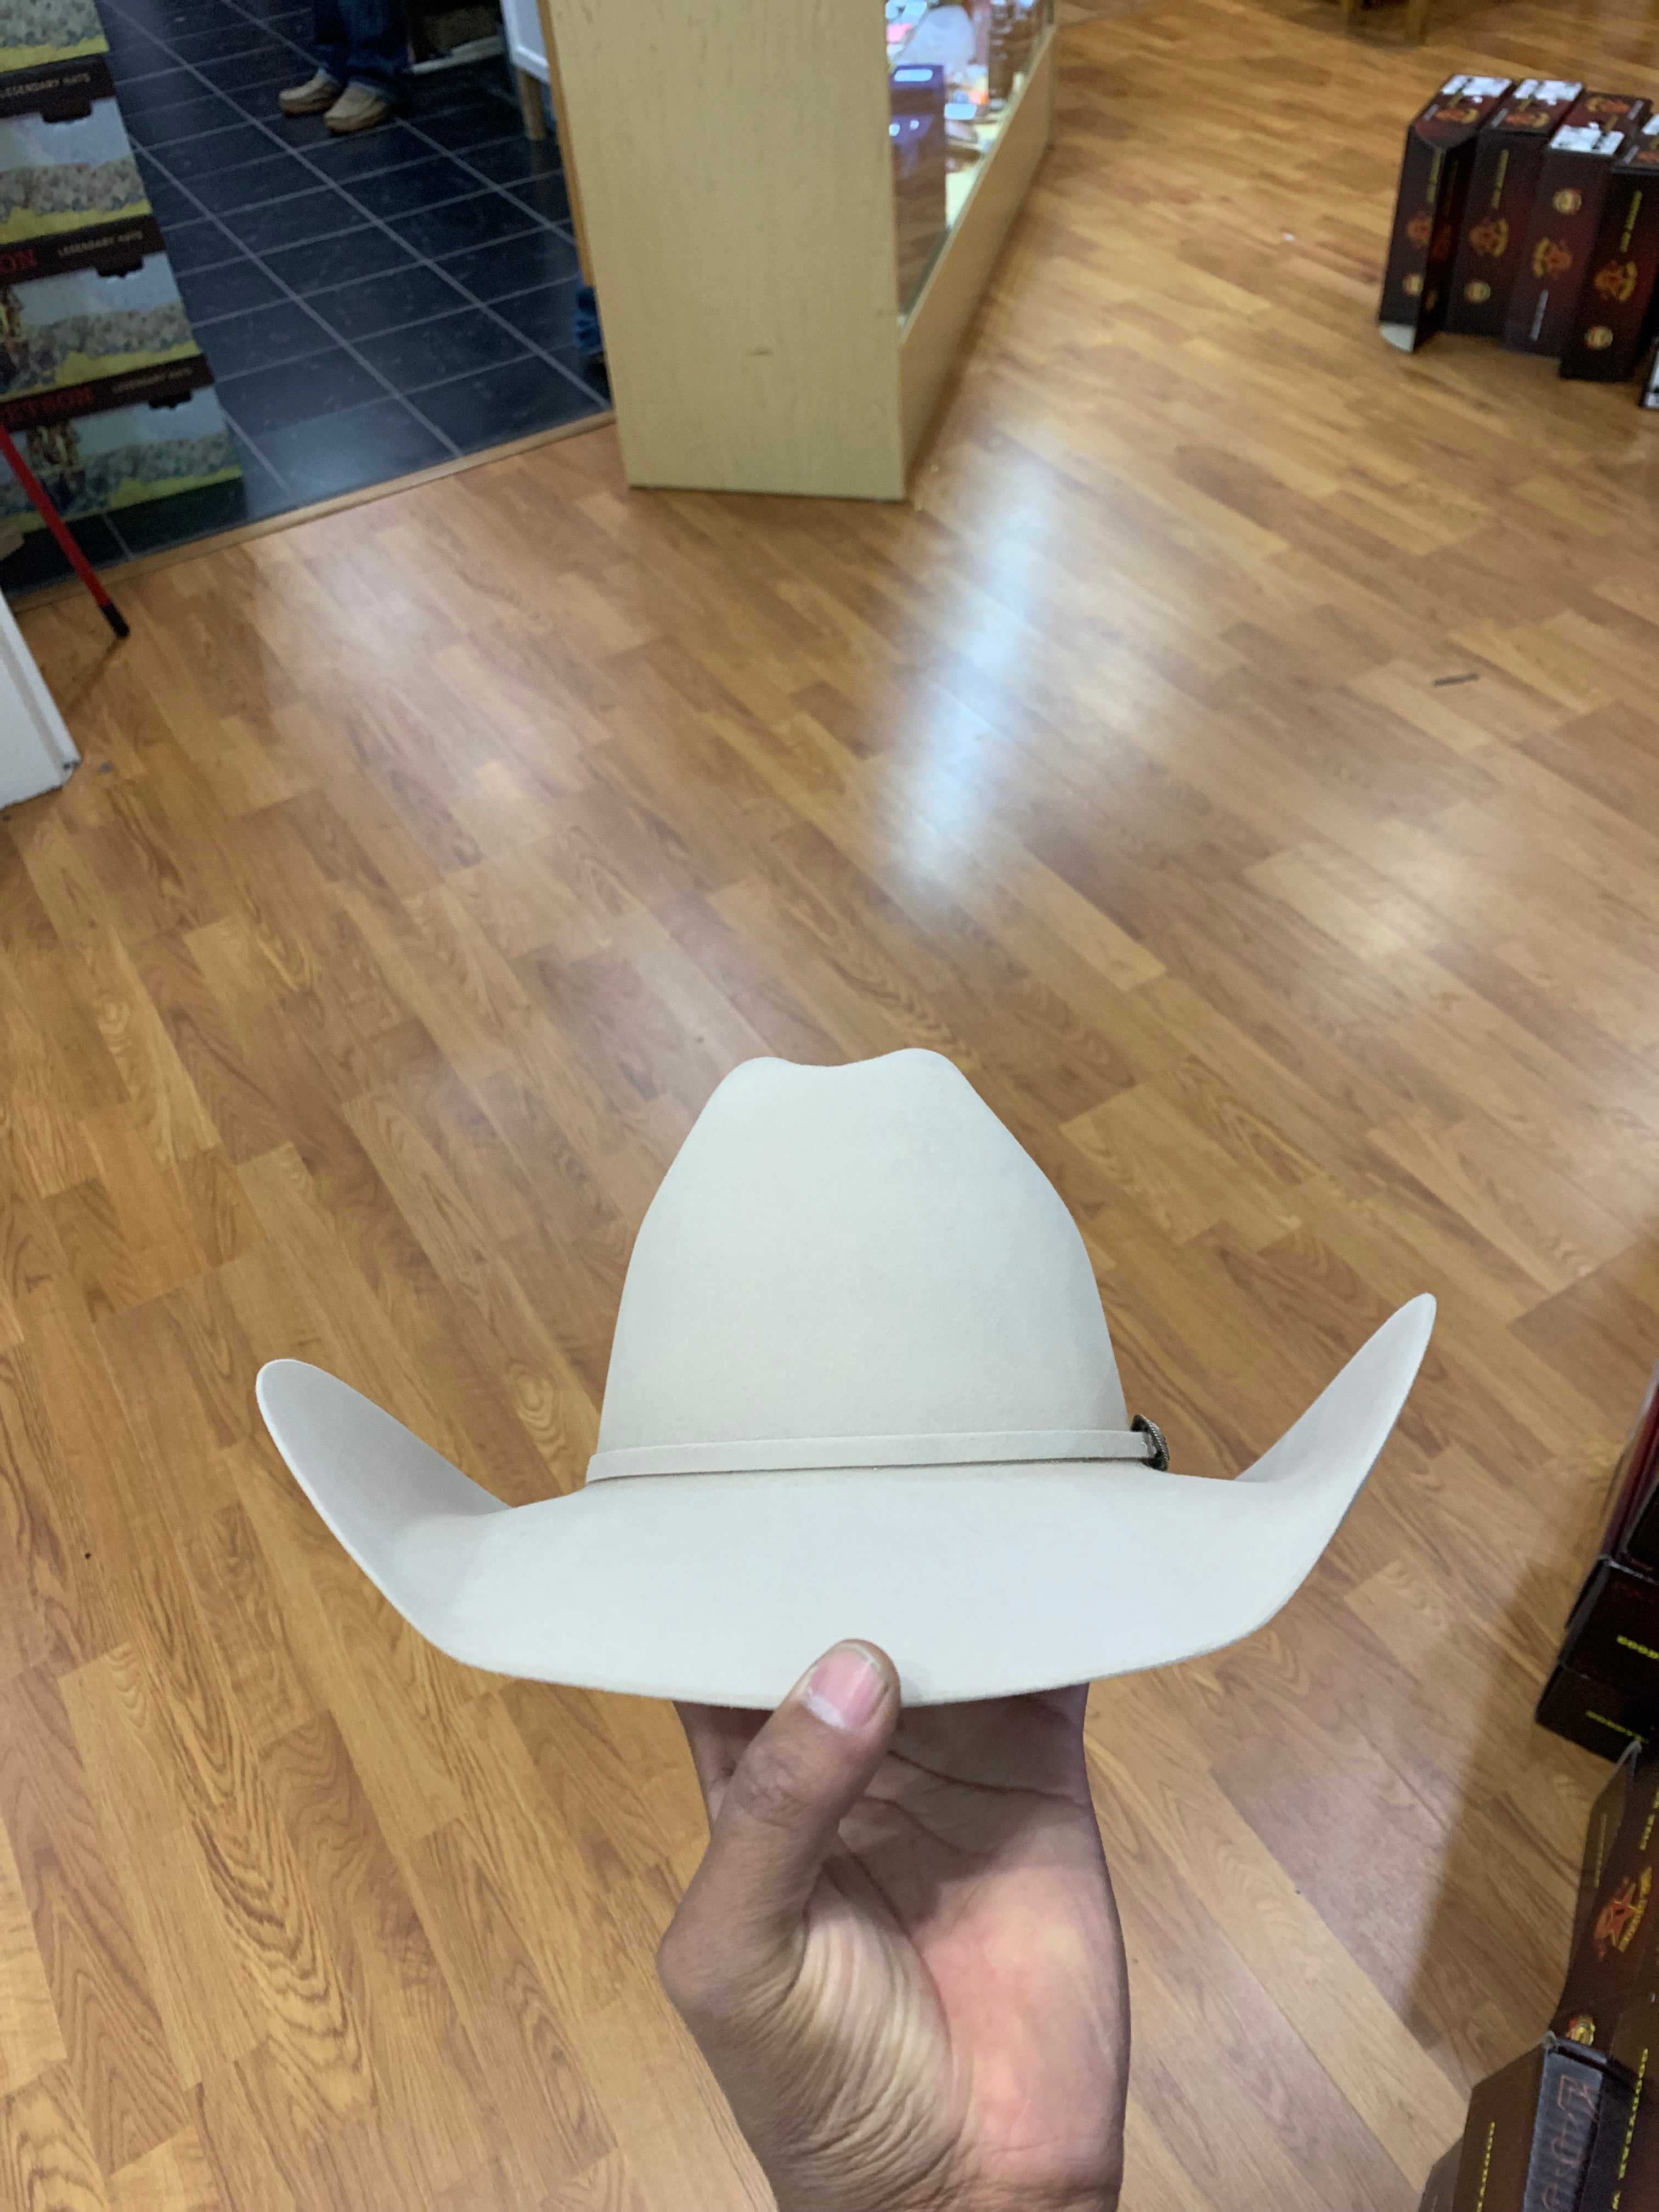 COWBOY HAT RODEO KING 100X SILVERBELLY TOP HAND MALBORO STYLE